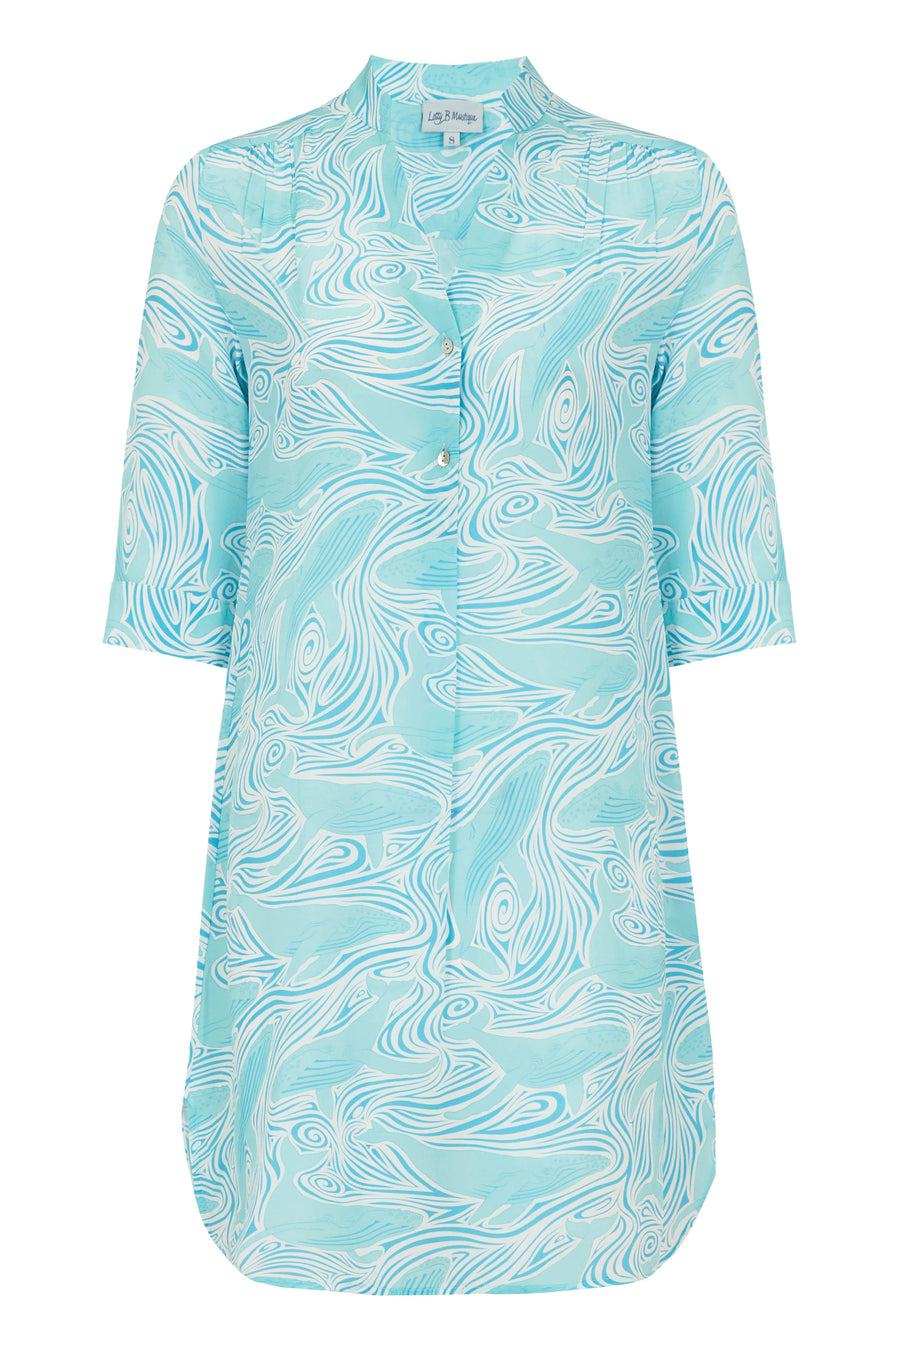 Designer silk Decima dress by Lotty B in Whale turquoise print, luxury style Heron Bay Mustique